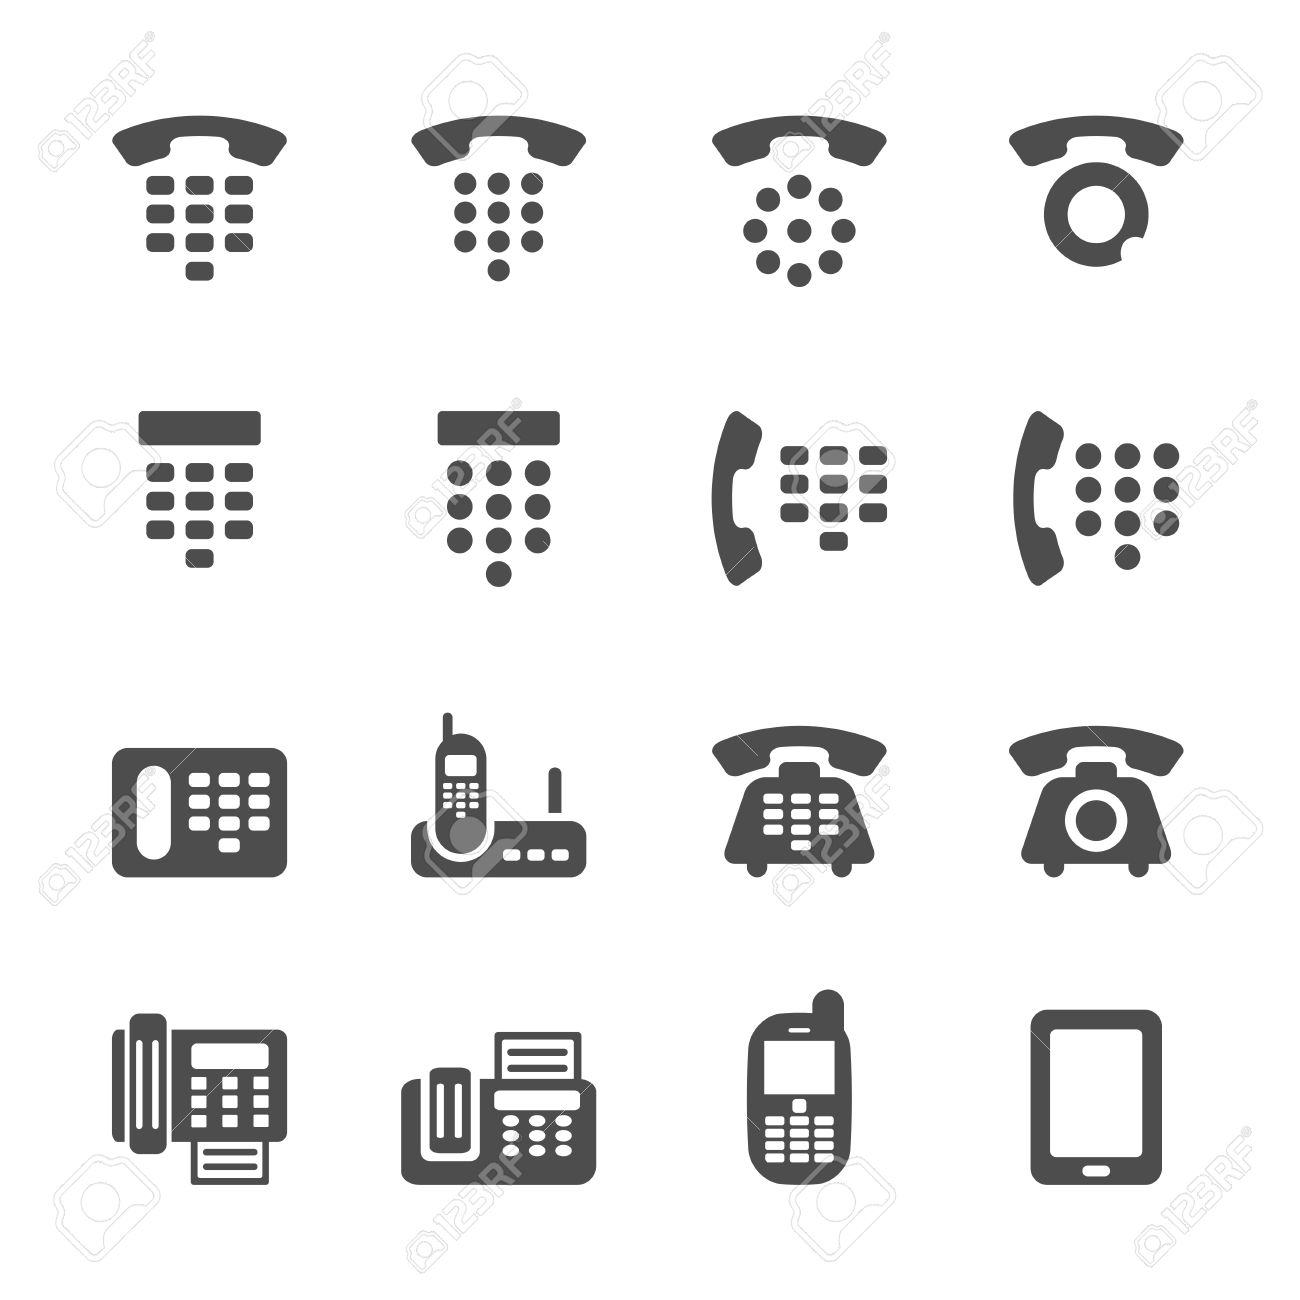 Call, communication, fax, phone, telephone icon | Icon search engine